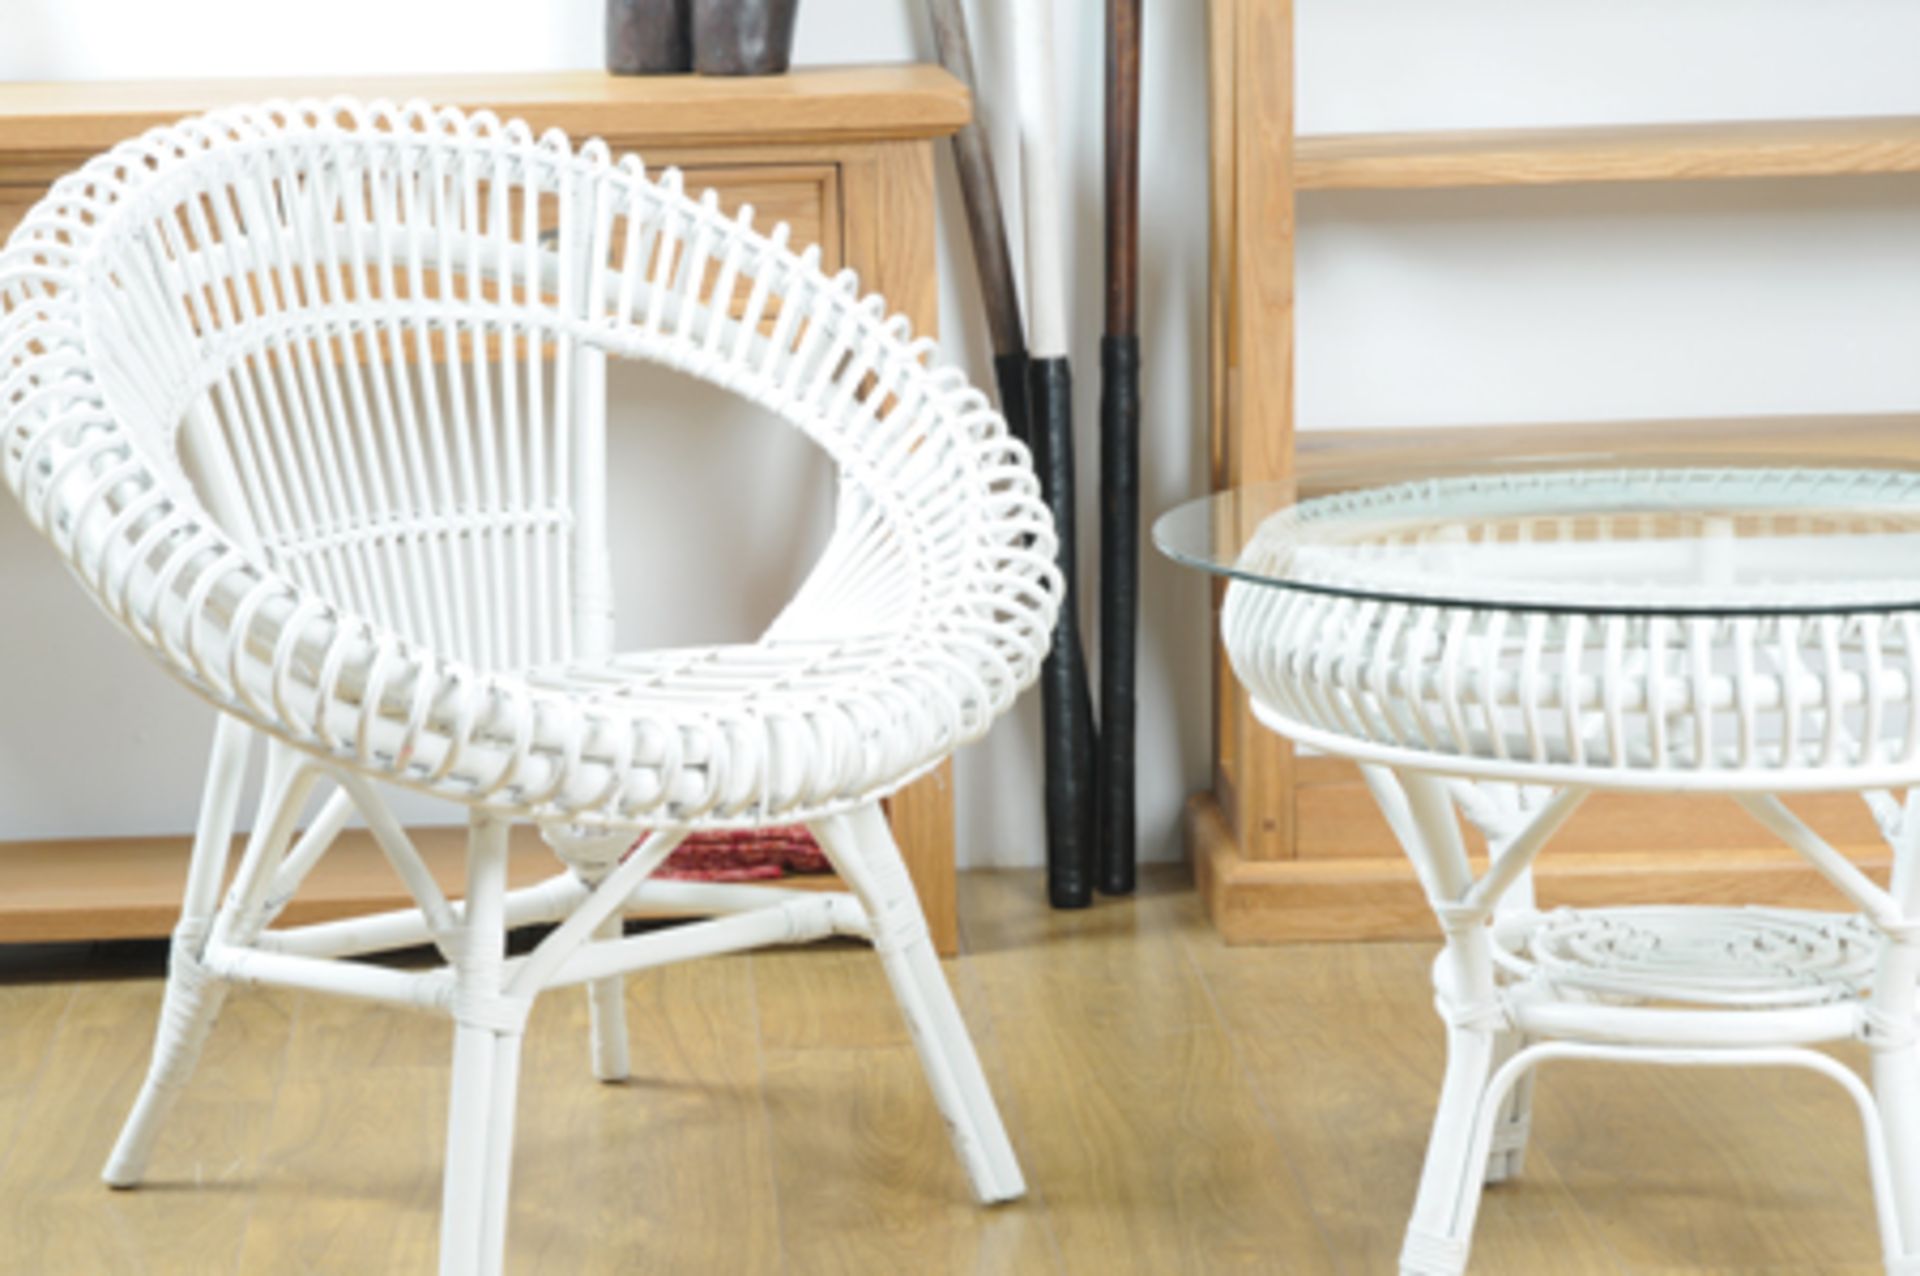 Matahari Chair White (sold without cushion) a rattan chair made from natural rattan material